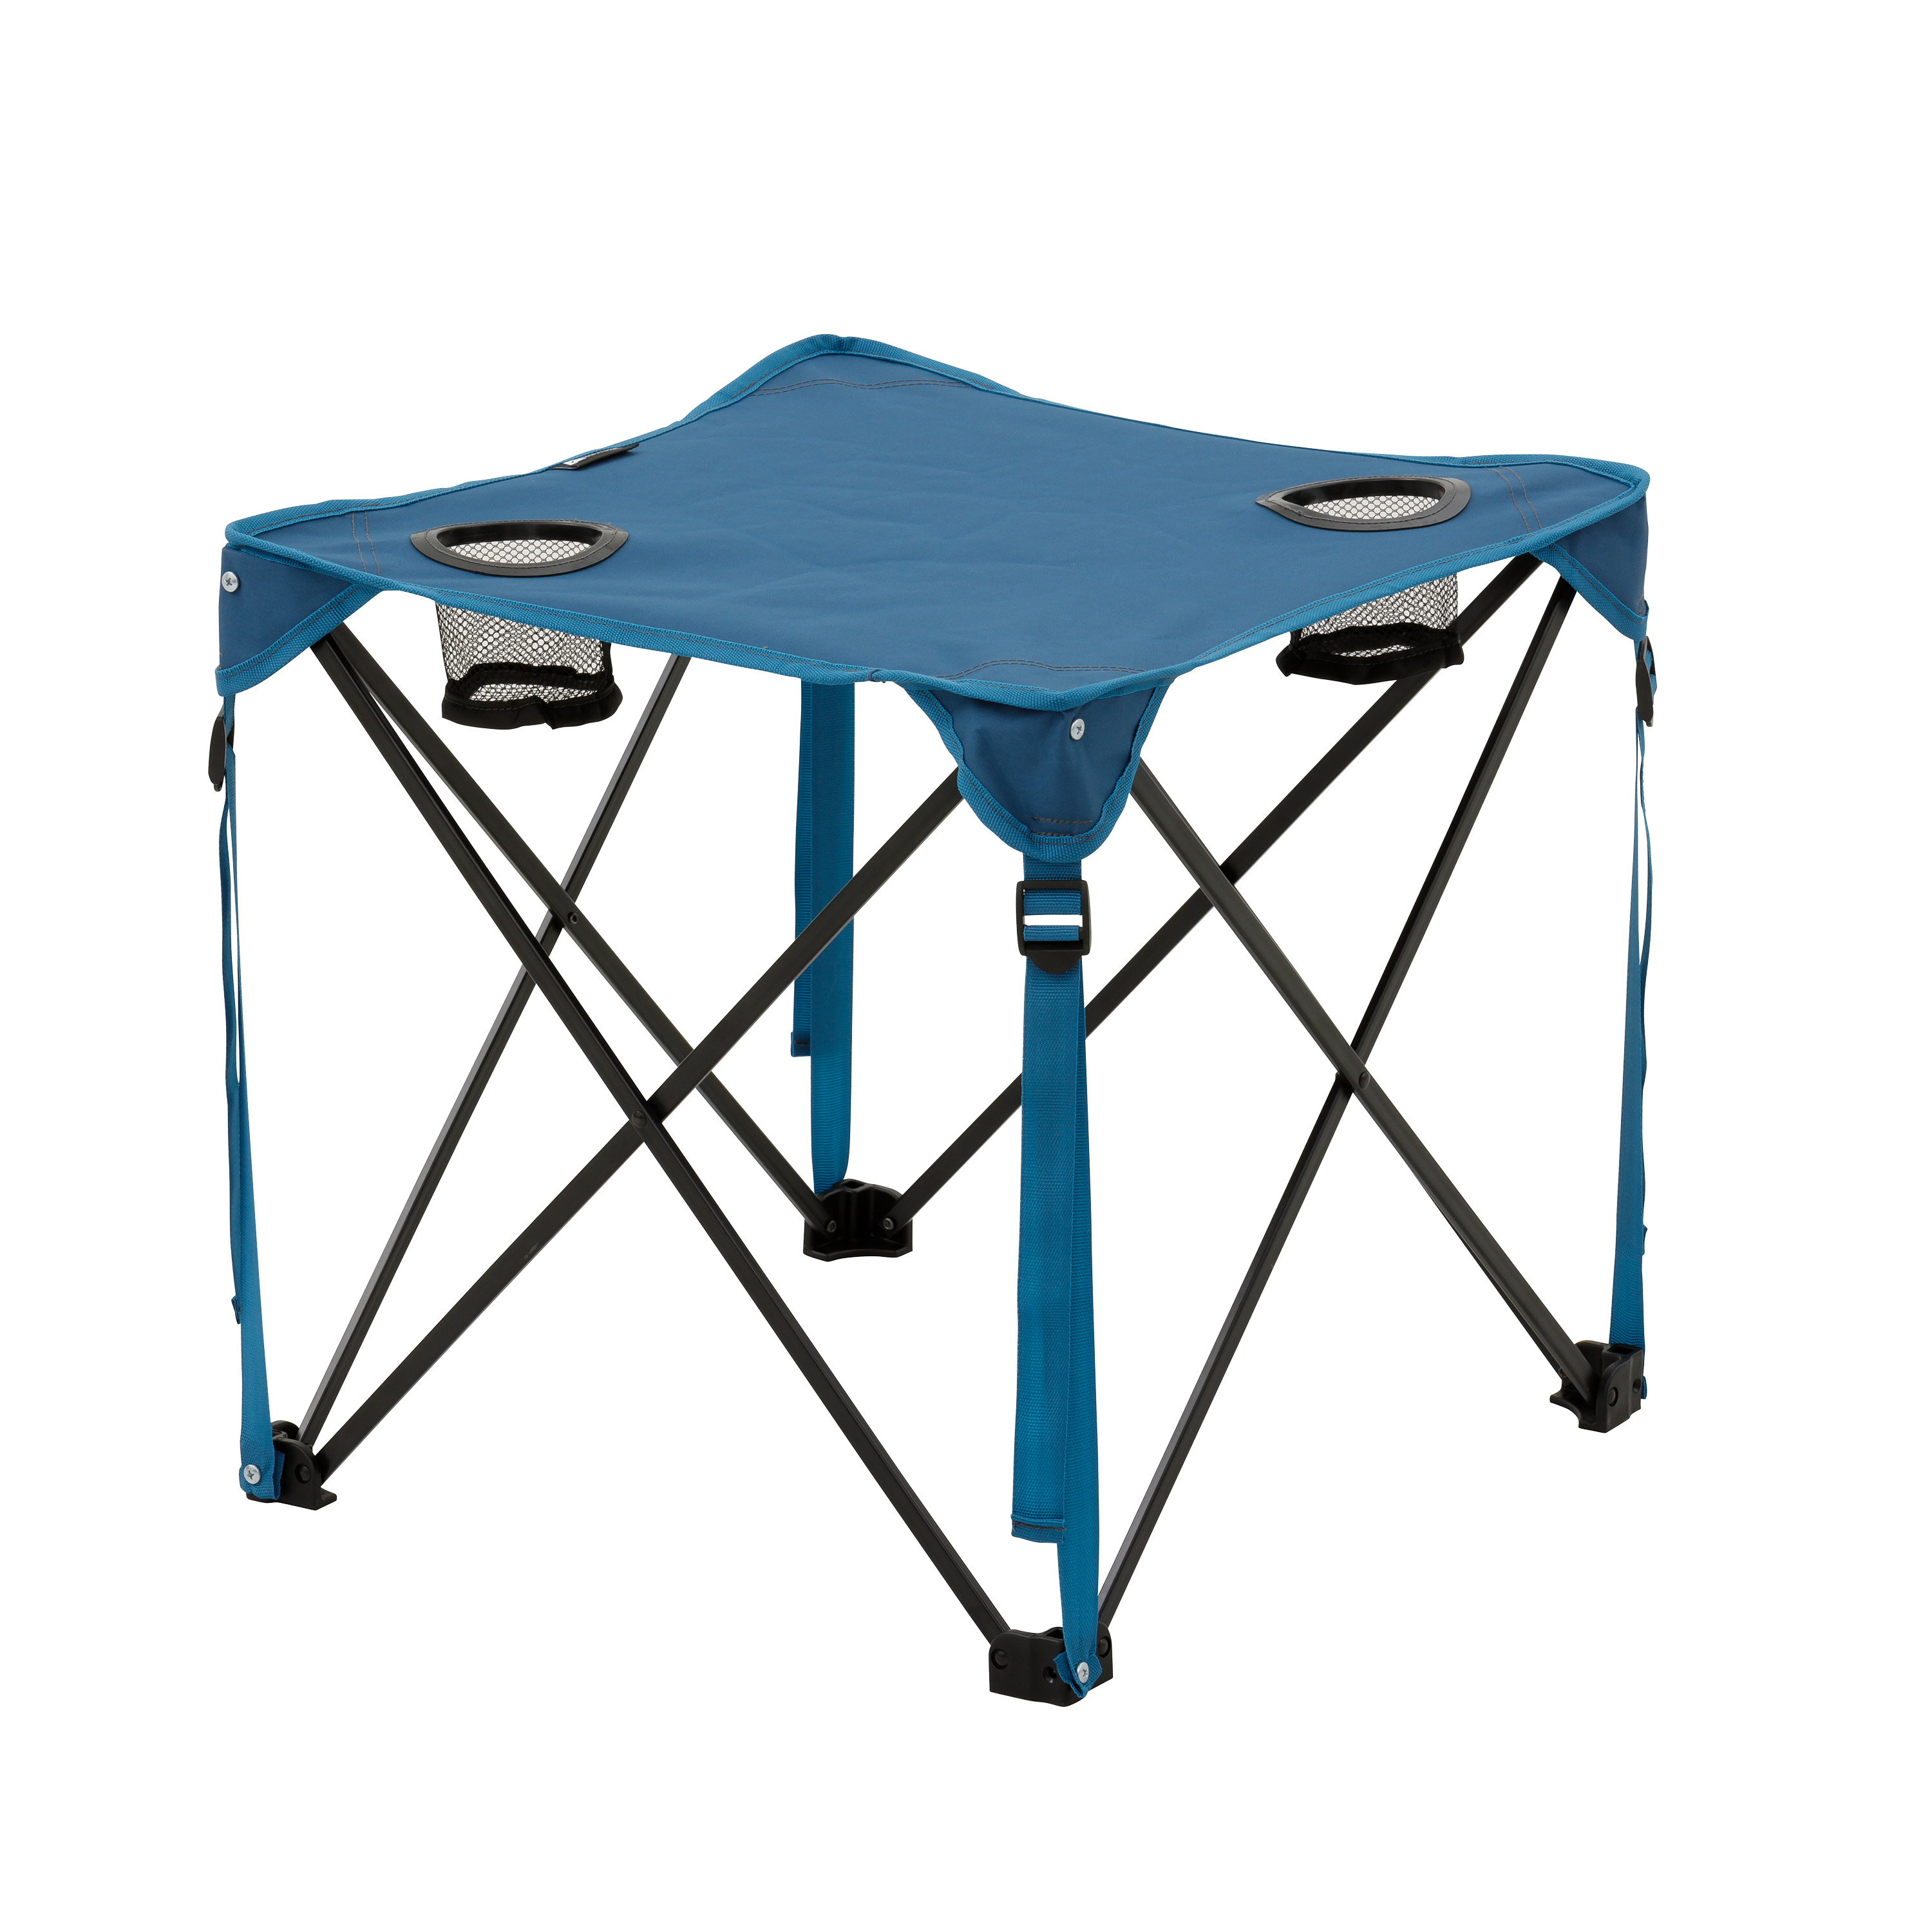 Ozark Trail 4 Piece, Tent, Chair and Table Camping Combo - image 9 of 15